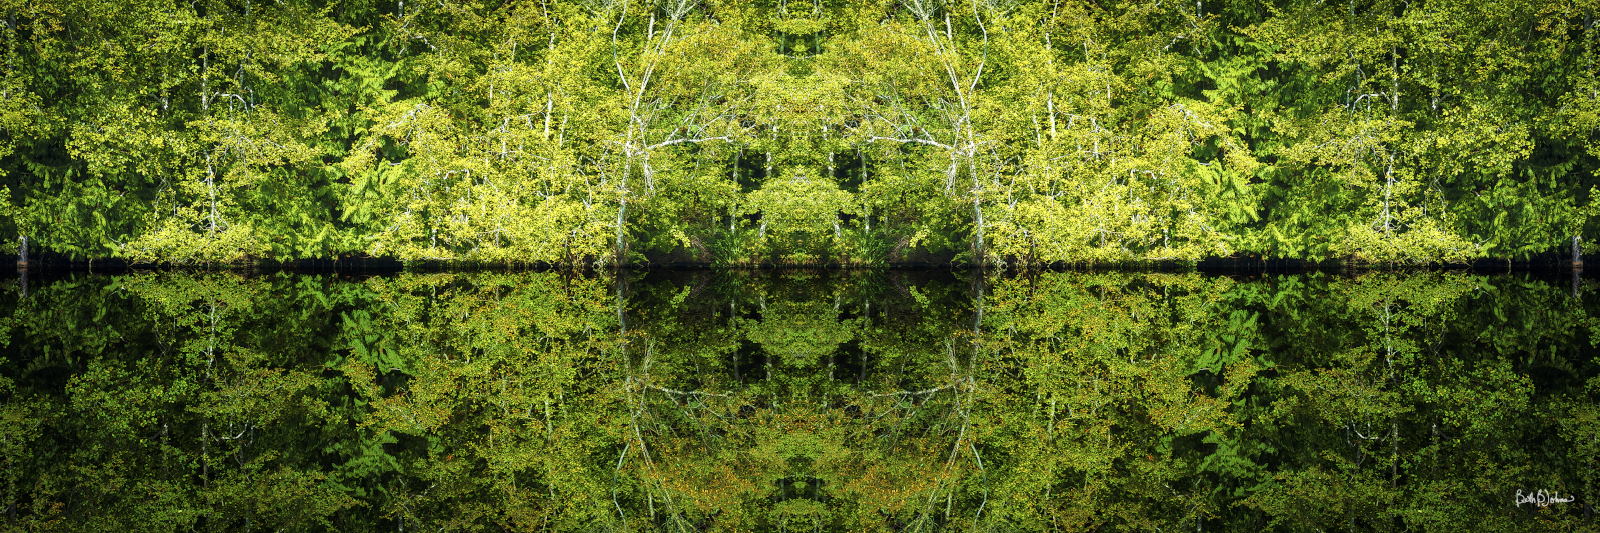 Composite Photograph of Reflections, Beth B Johns Photographic Art